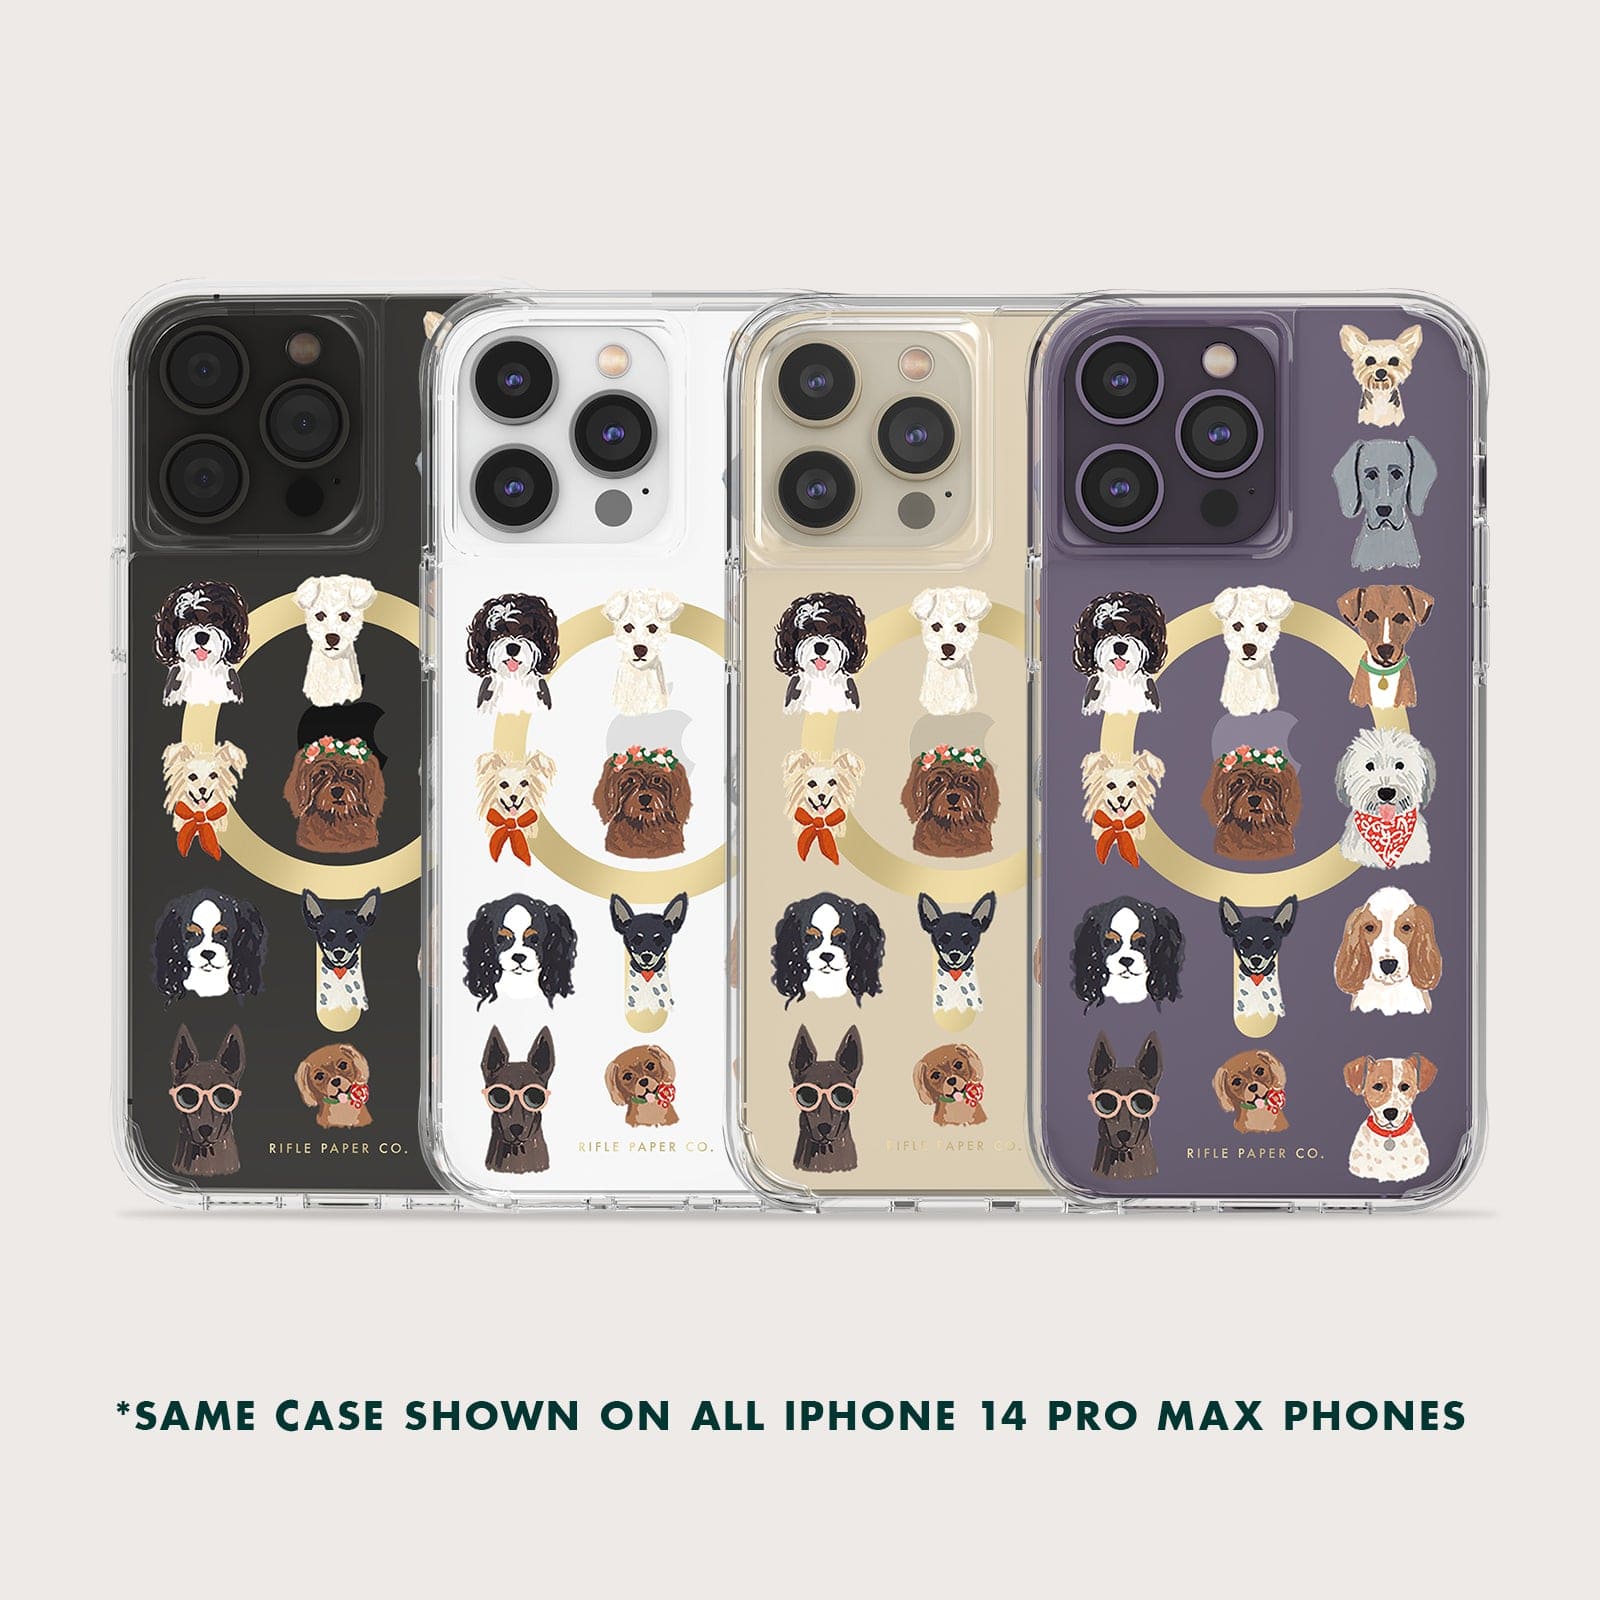 SAME CASE SHOWN ON ALL IPHONE 14 PRO MAX PHONES.